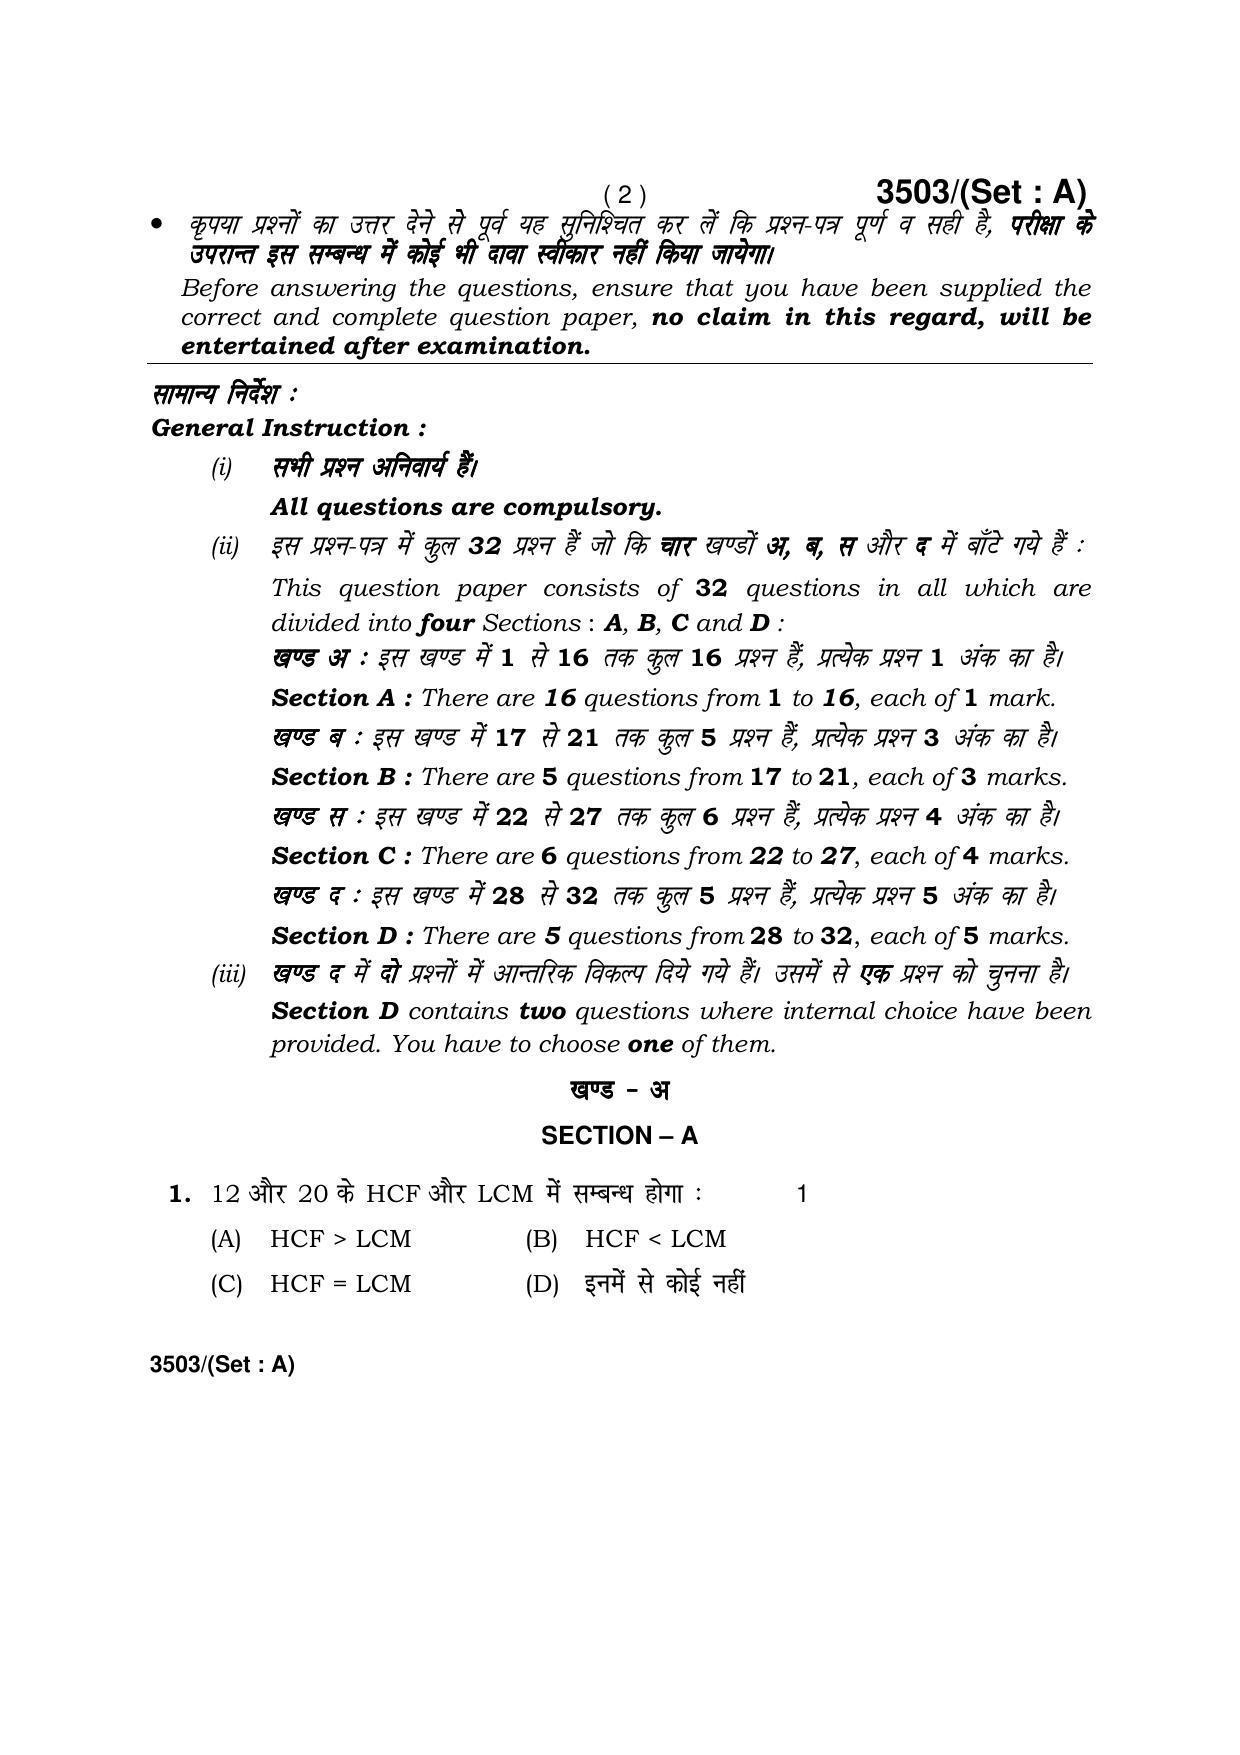 Haryana Board HBSE Class 10 Mathematics -A 2018 Question Paper - Page 2